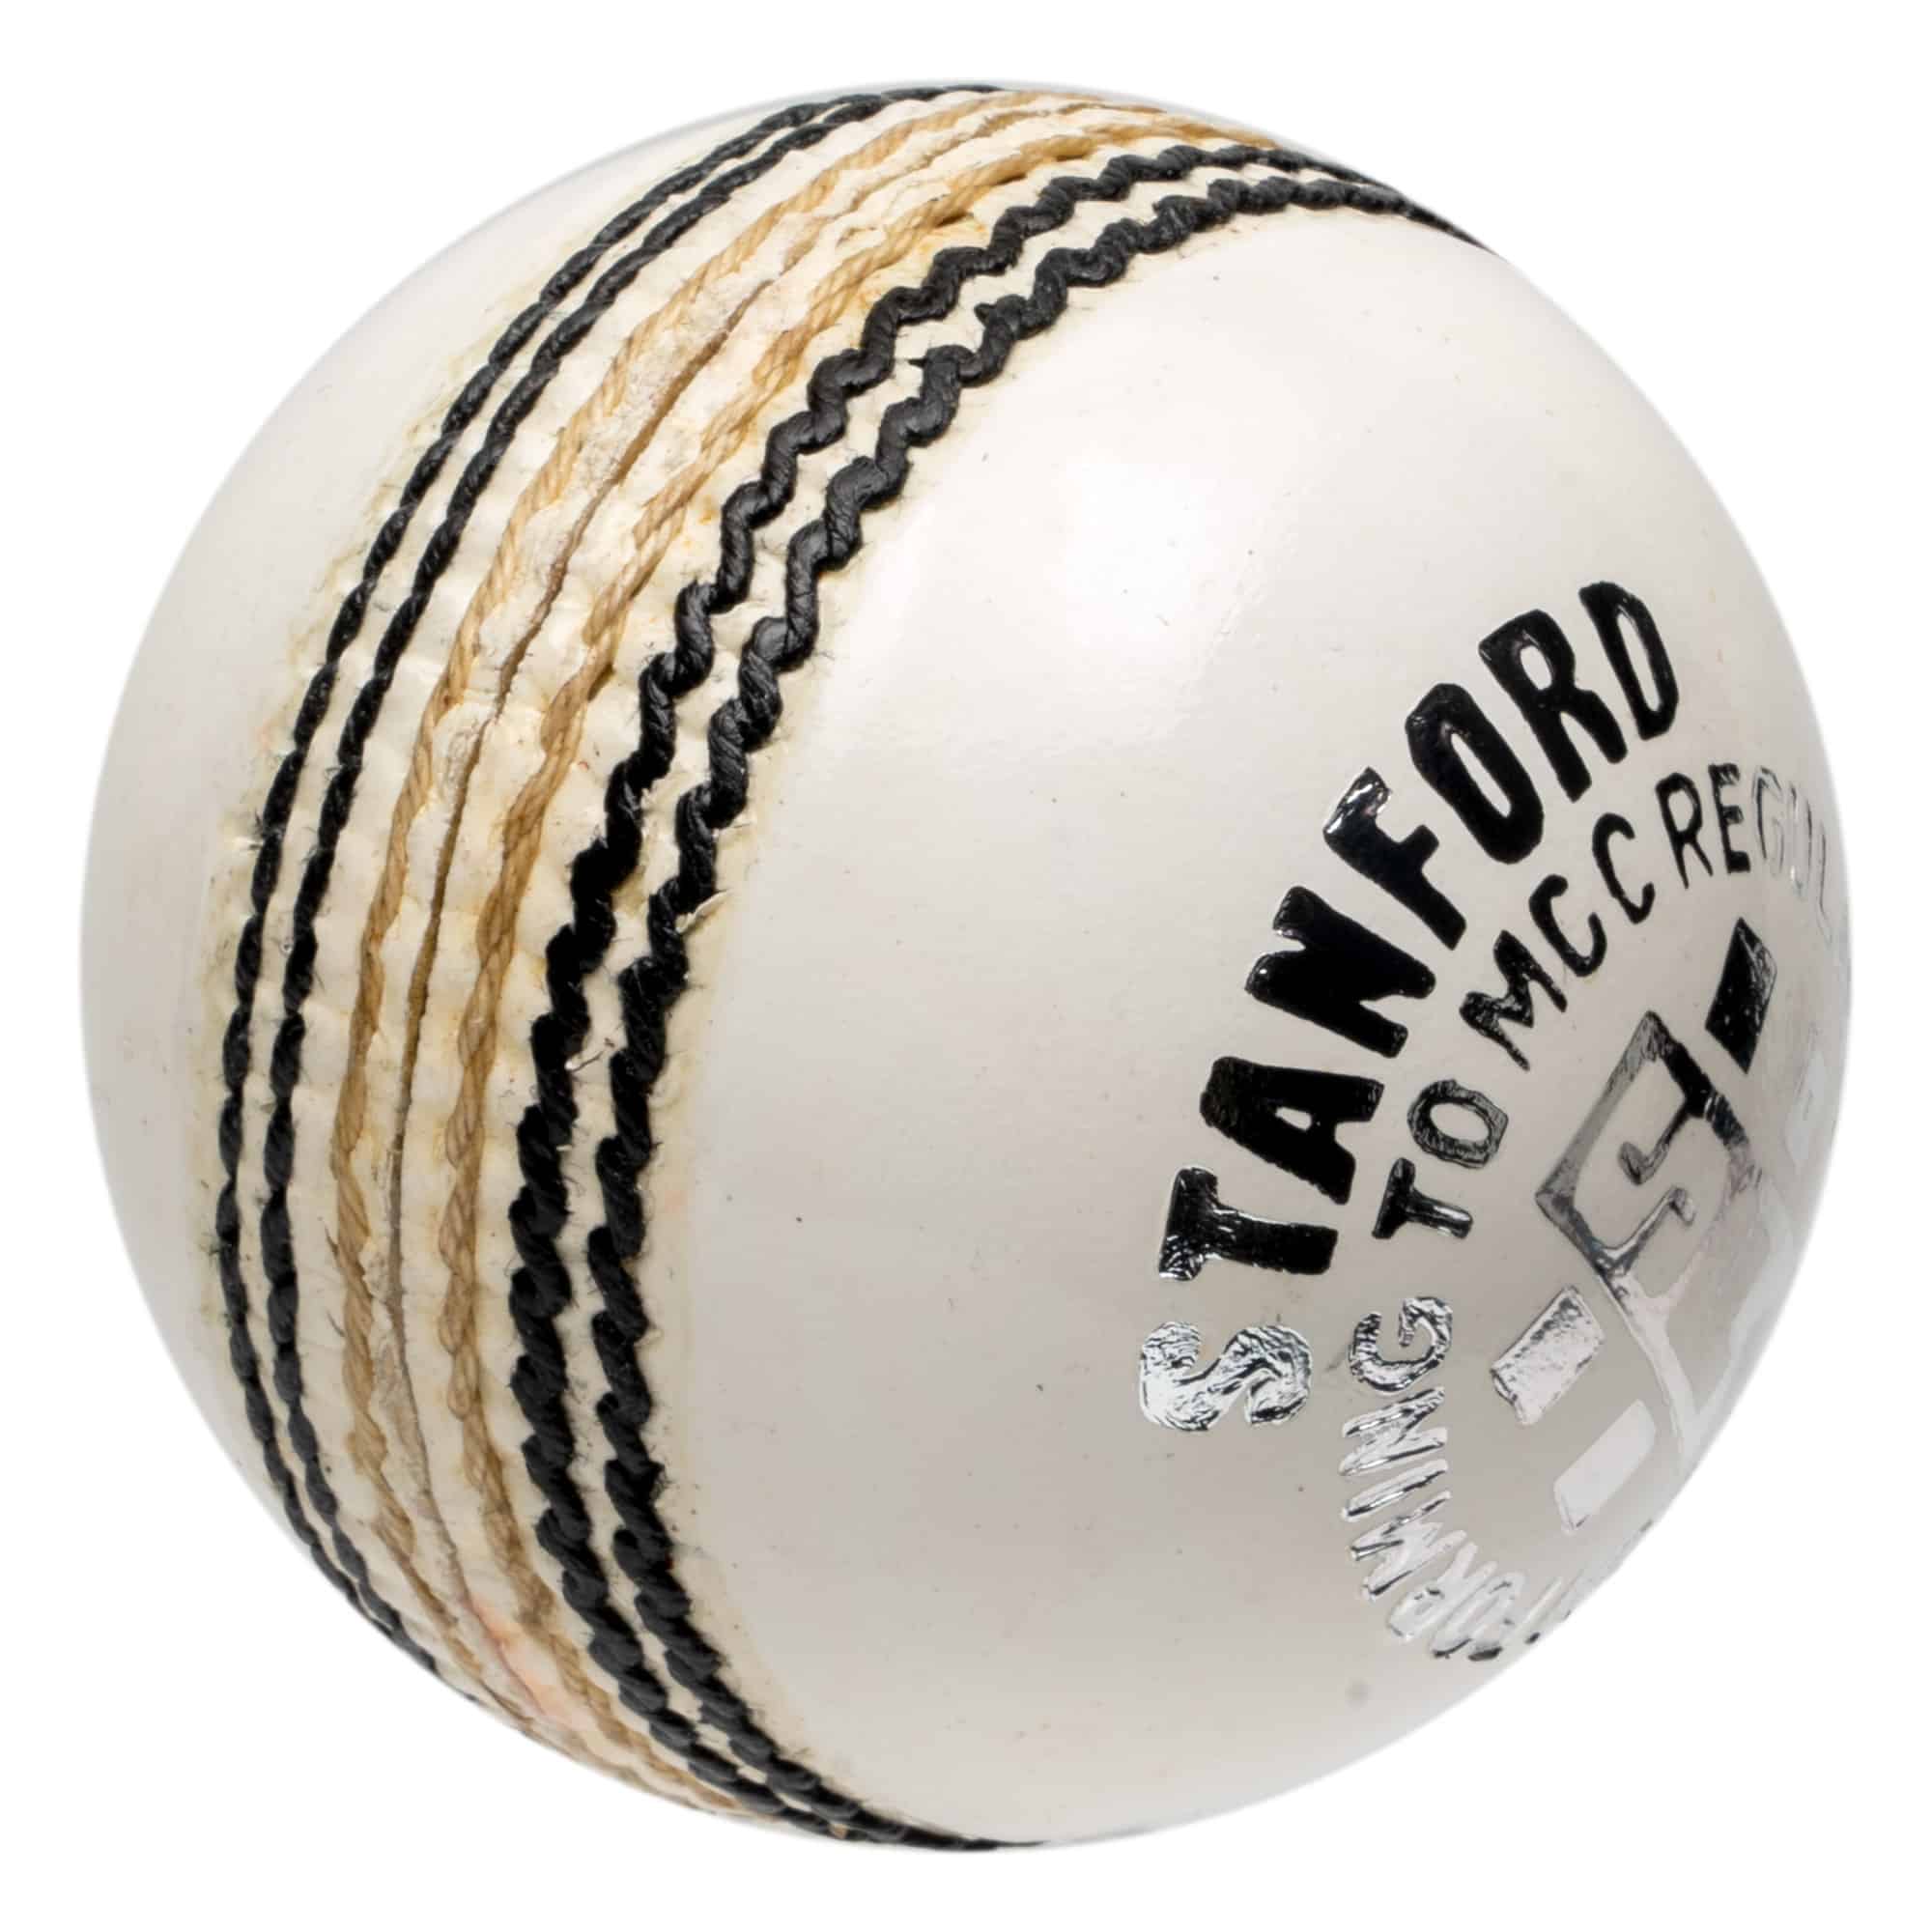 Stanford - 2-Piece Leather Swinger Cricket Ball